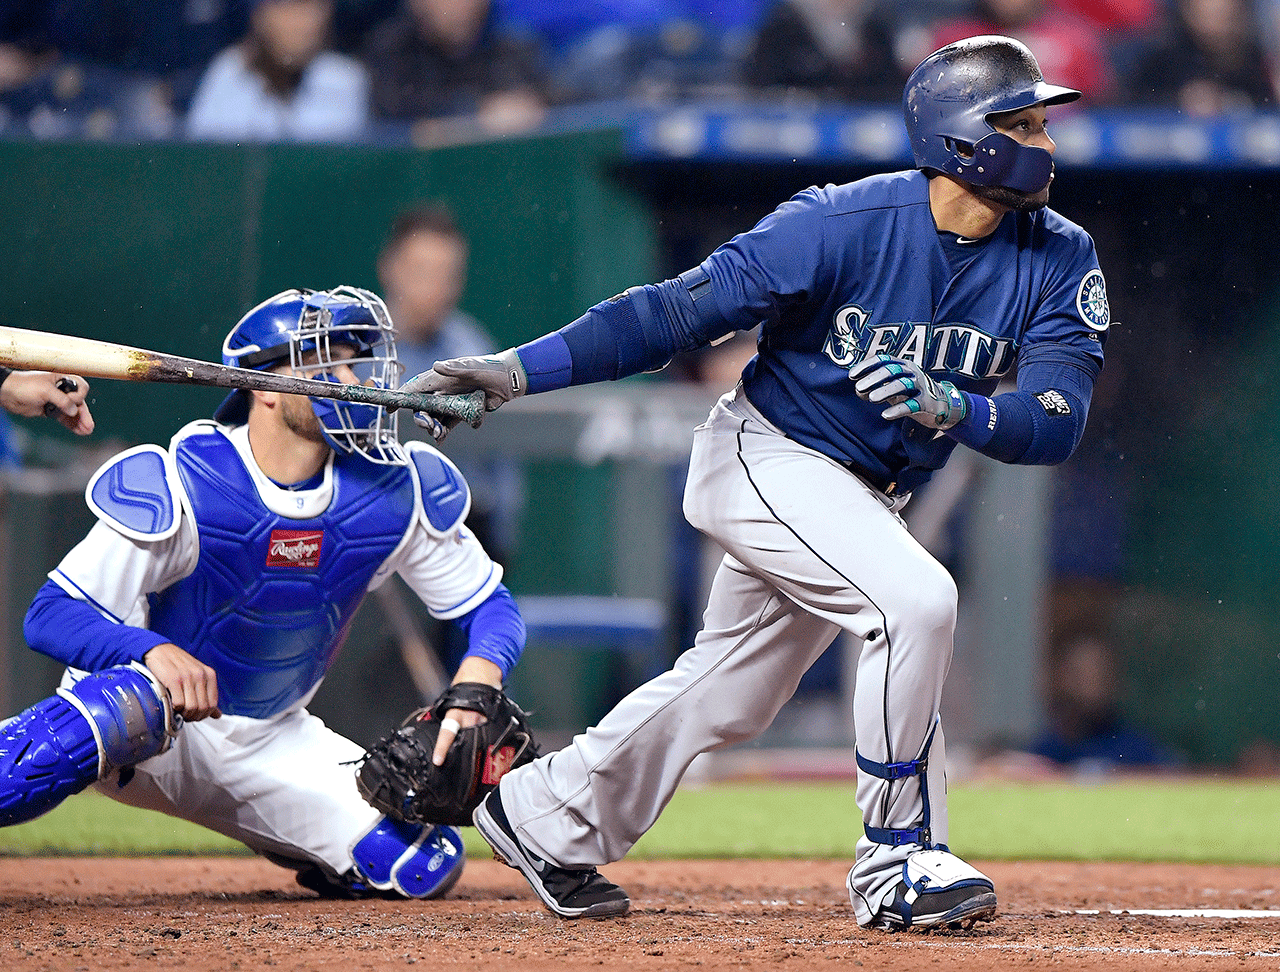 Robinson Cano passed a hall of famer for second-most HRs ever by a second baseman